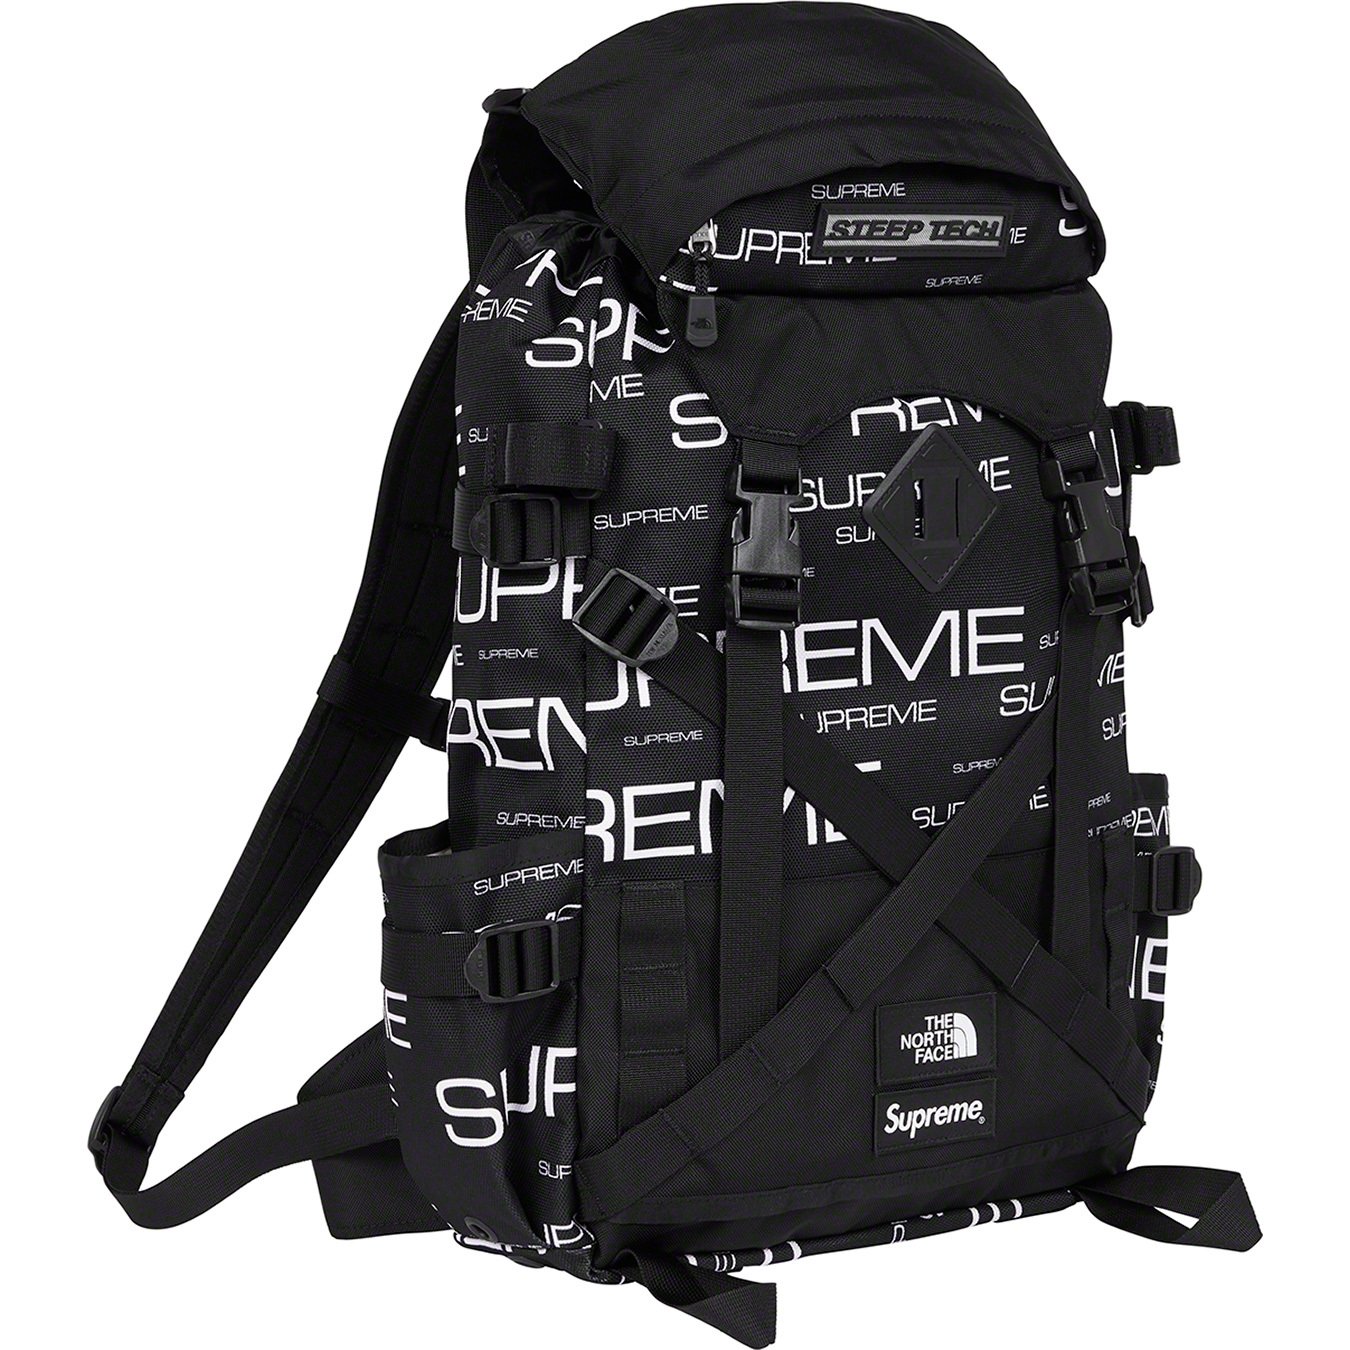 Supreme®/The North Face® Steep Tech Backpack - Supreme Community